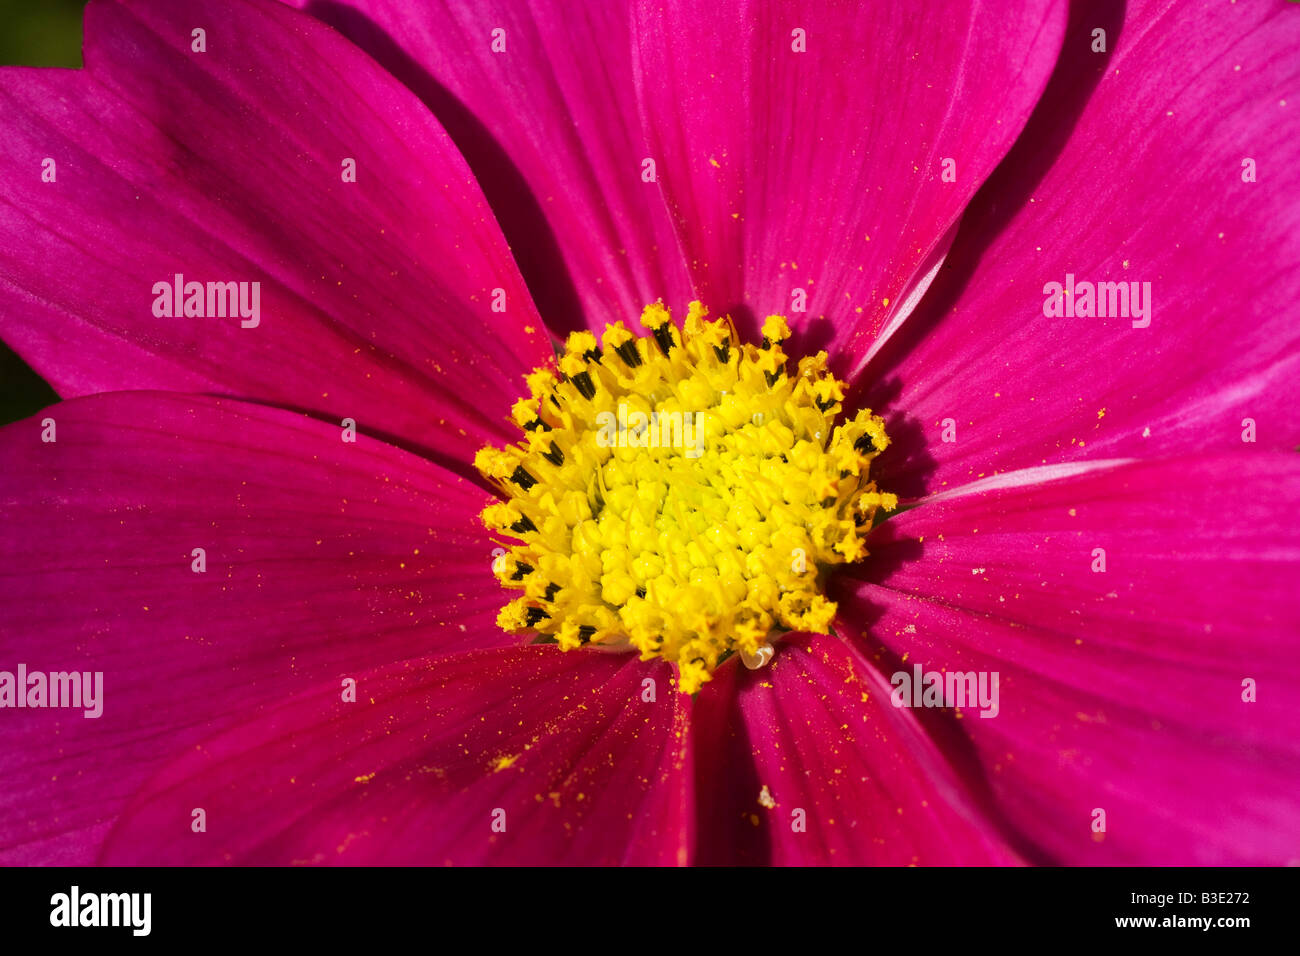 Closeup of a pink Cosmos flower Cosmos bipinnatus This species is considered a half hardy annual August 2008 Stock Photo